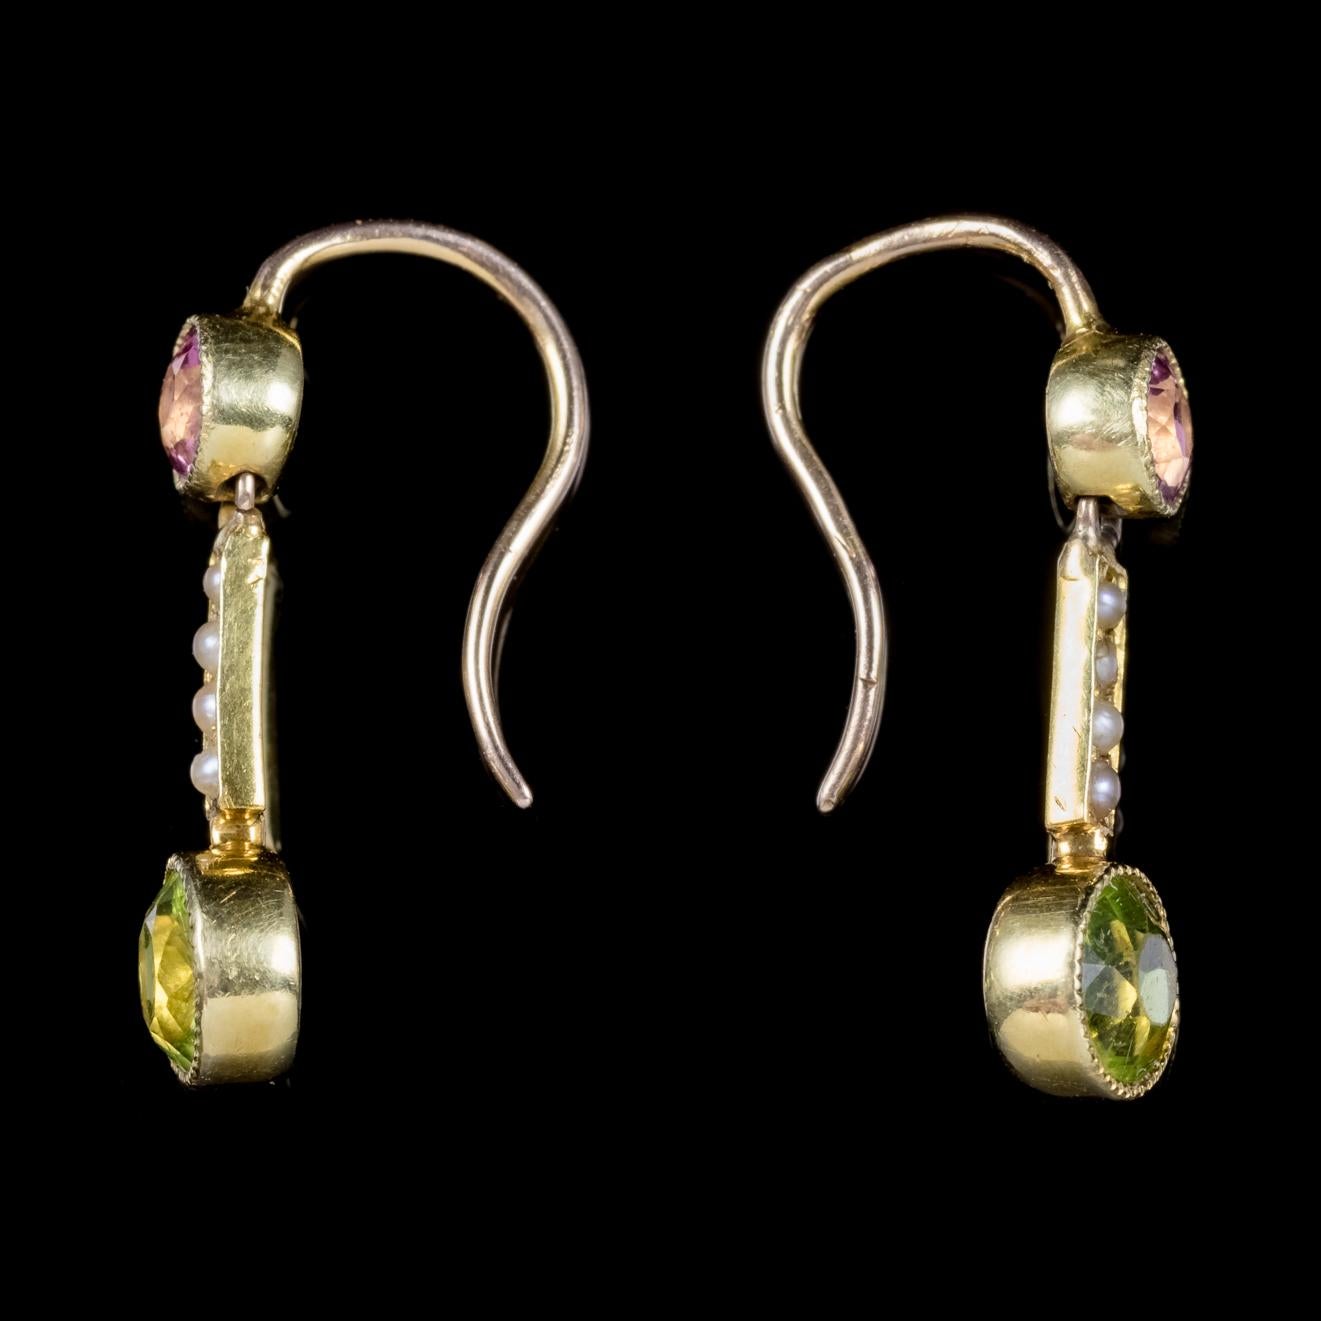 A fabulous pair of antique Victorian Suffragette drop earrings C. 1900, set with a green 0.22ct Peridot, a violet 0.10ct Amethyst and four creamy white Pearls. 

Suffragettes liked to be depicted as feminine, their jewellery popularly consisted of